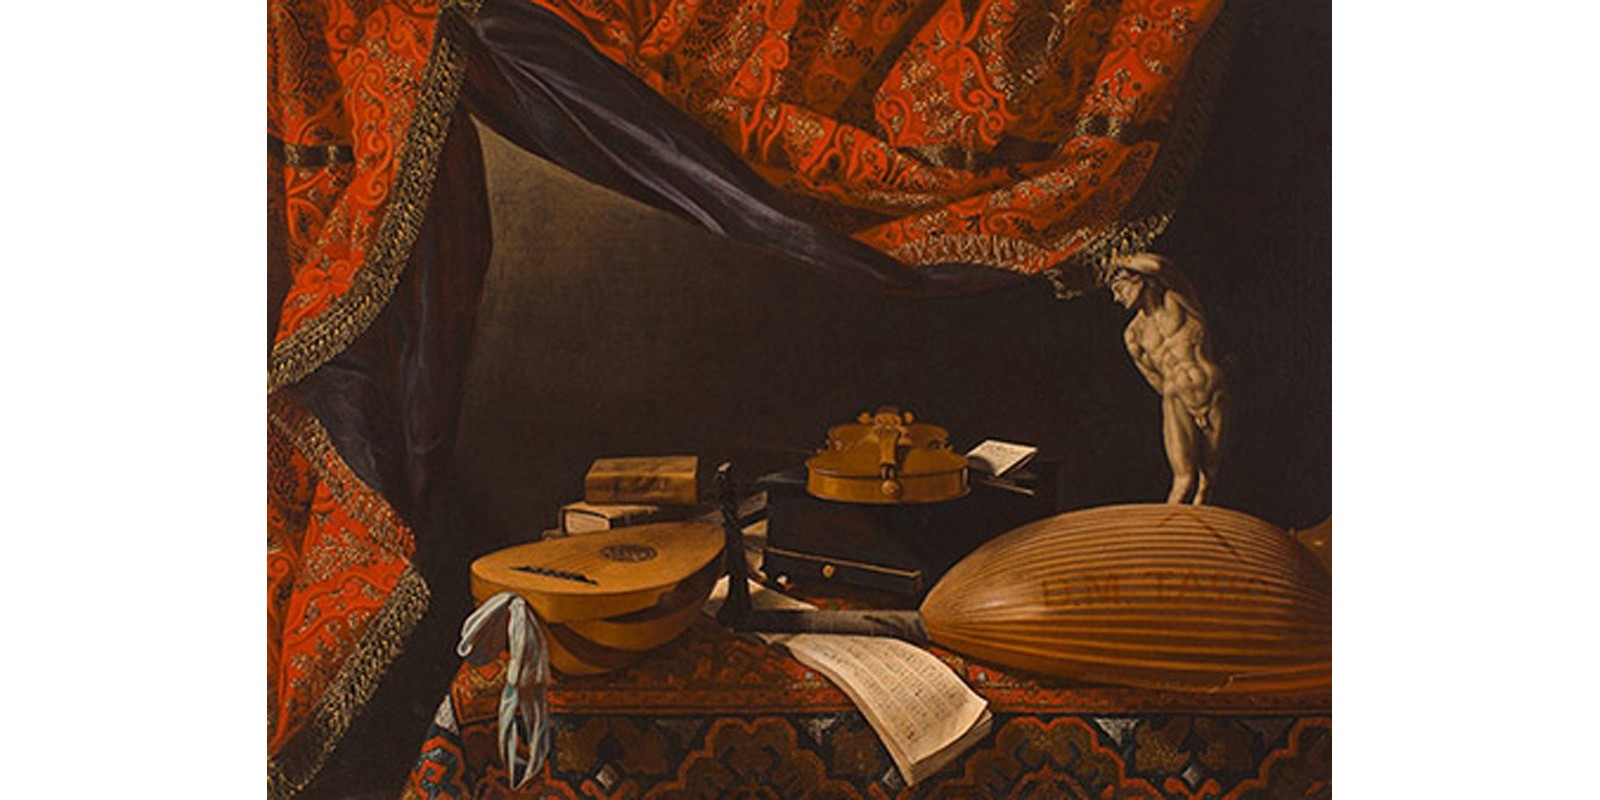 EVARISTO BASCHENIS - Still Life with Musical Instruments, Books and Sculpture